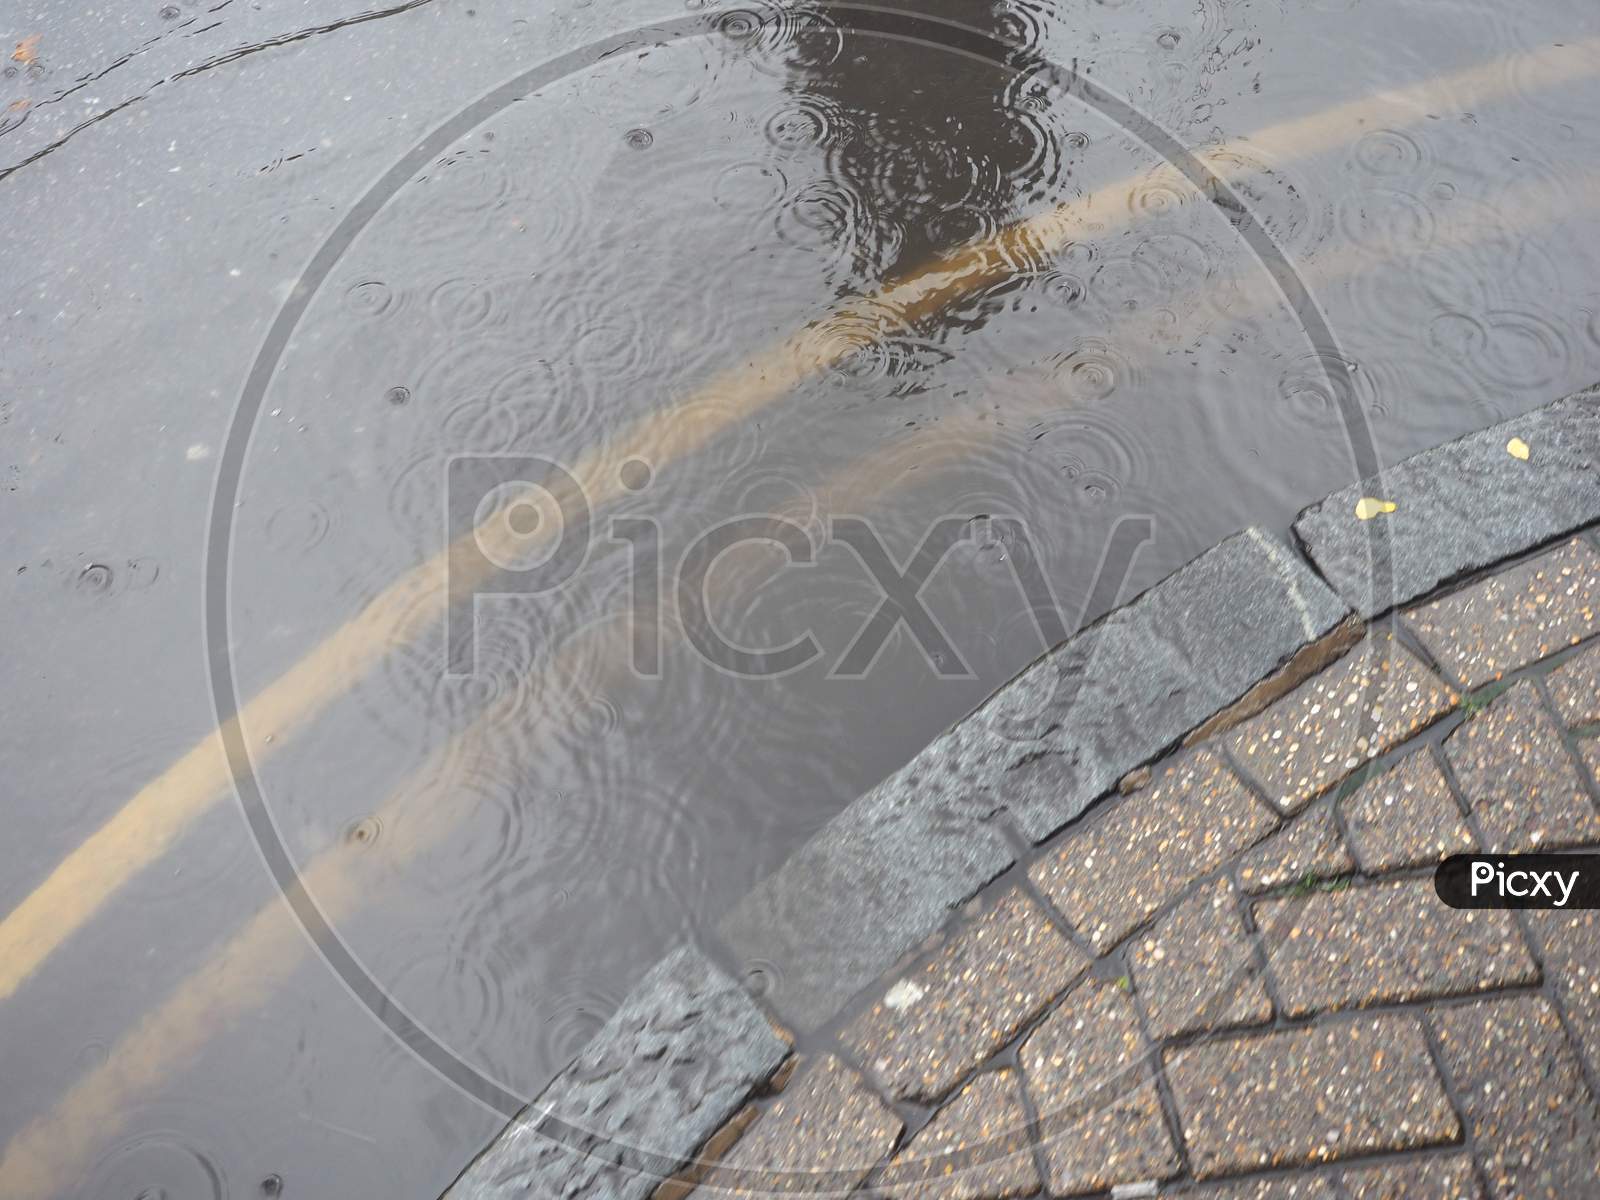 Puddle Of Rain Water